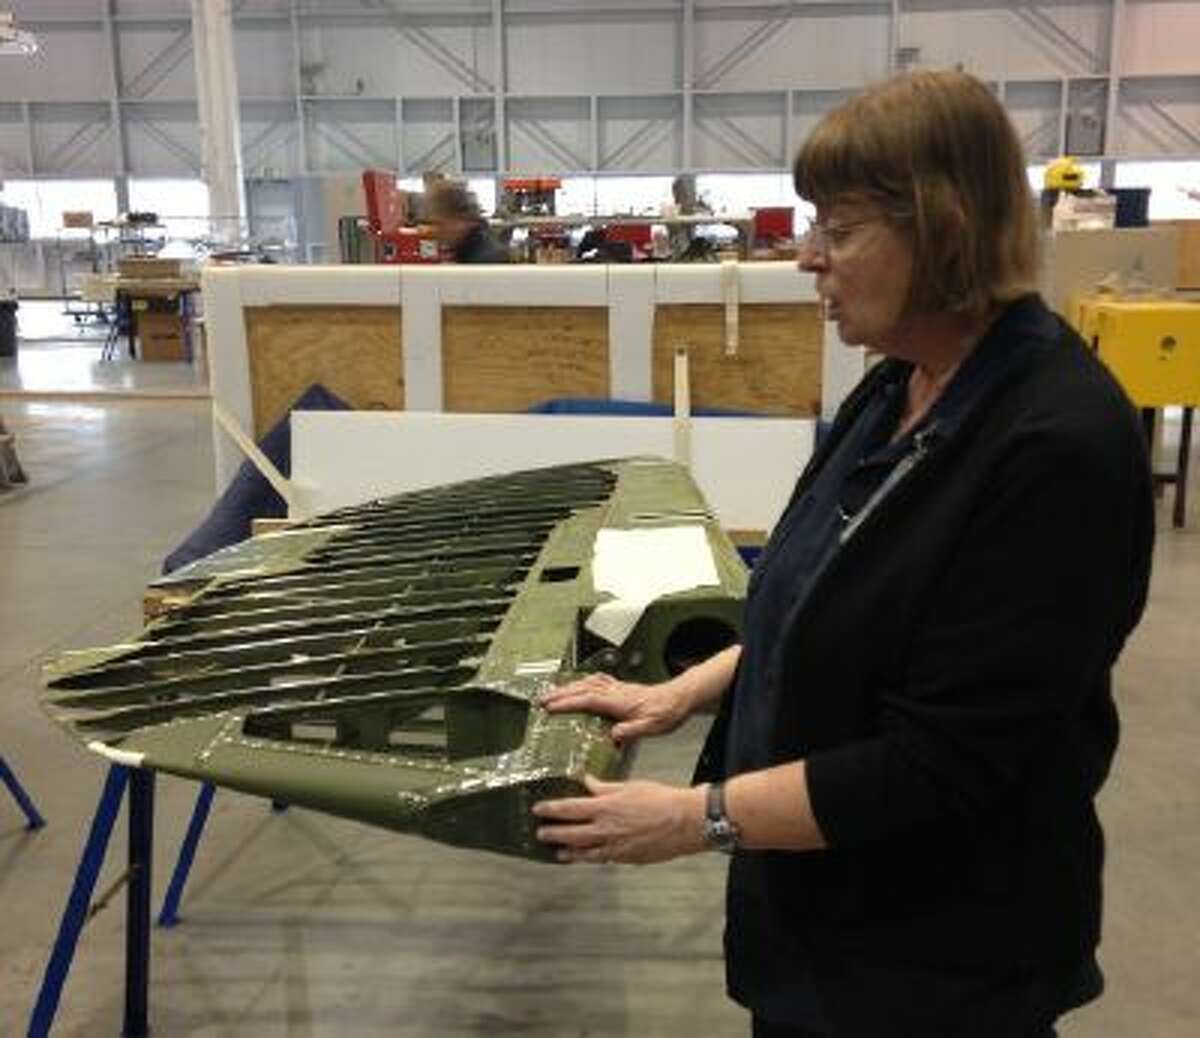 Restoration specialist Anne McCombs discusses how she will restore part of a World War II-era plane's rudder for display at the Smithsonian National Air and Space Museum's Udvar-Hazy Center.